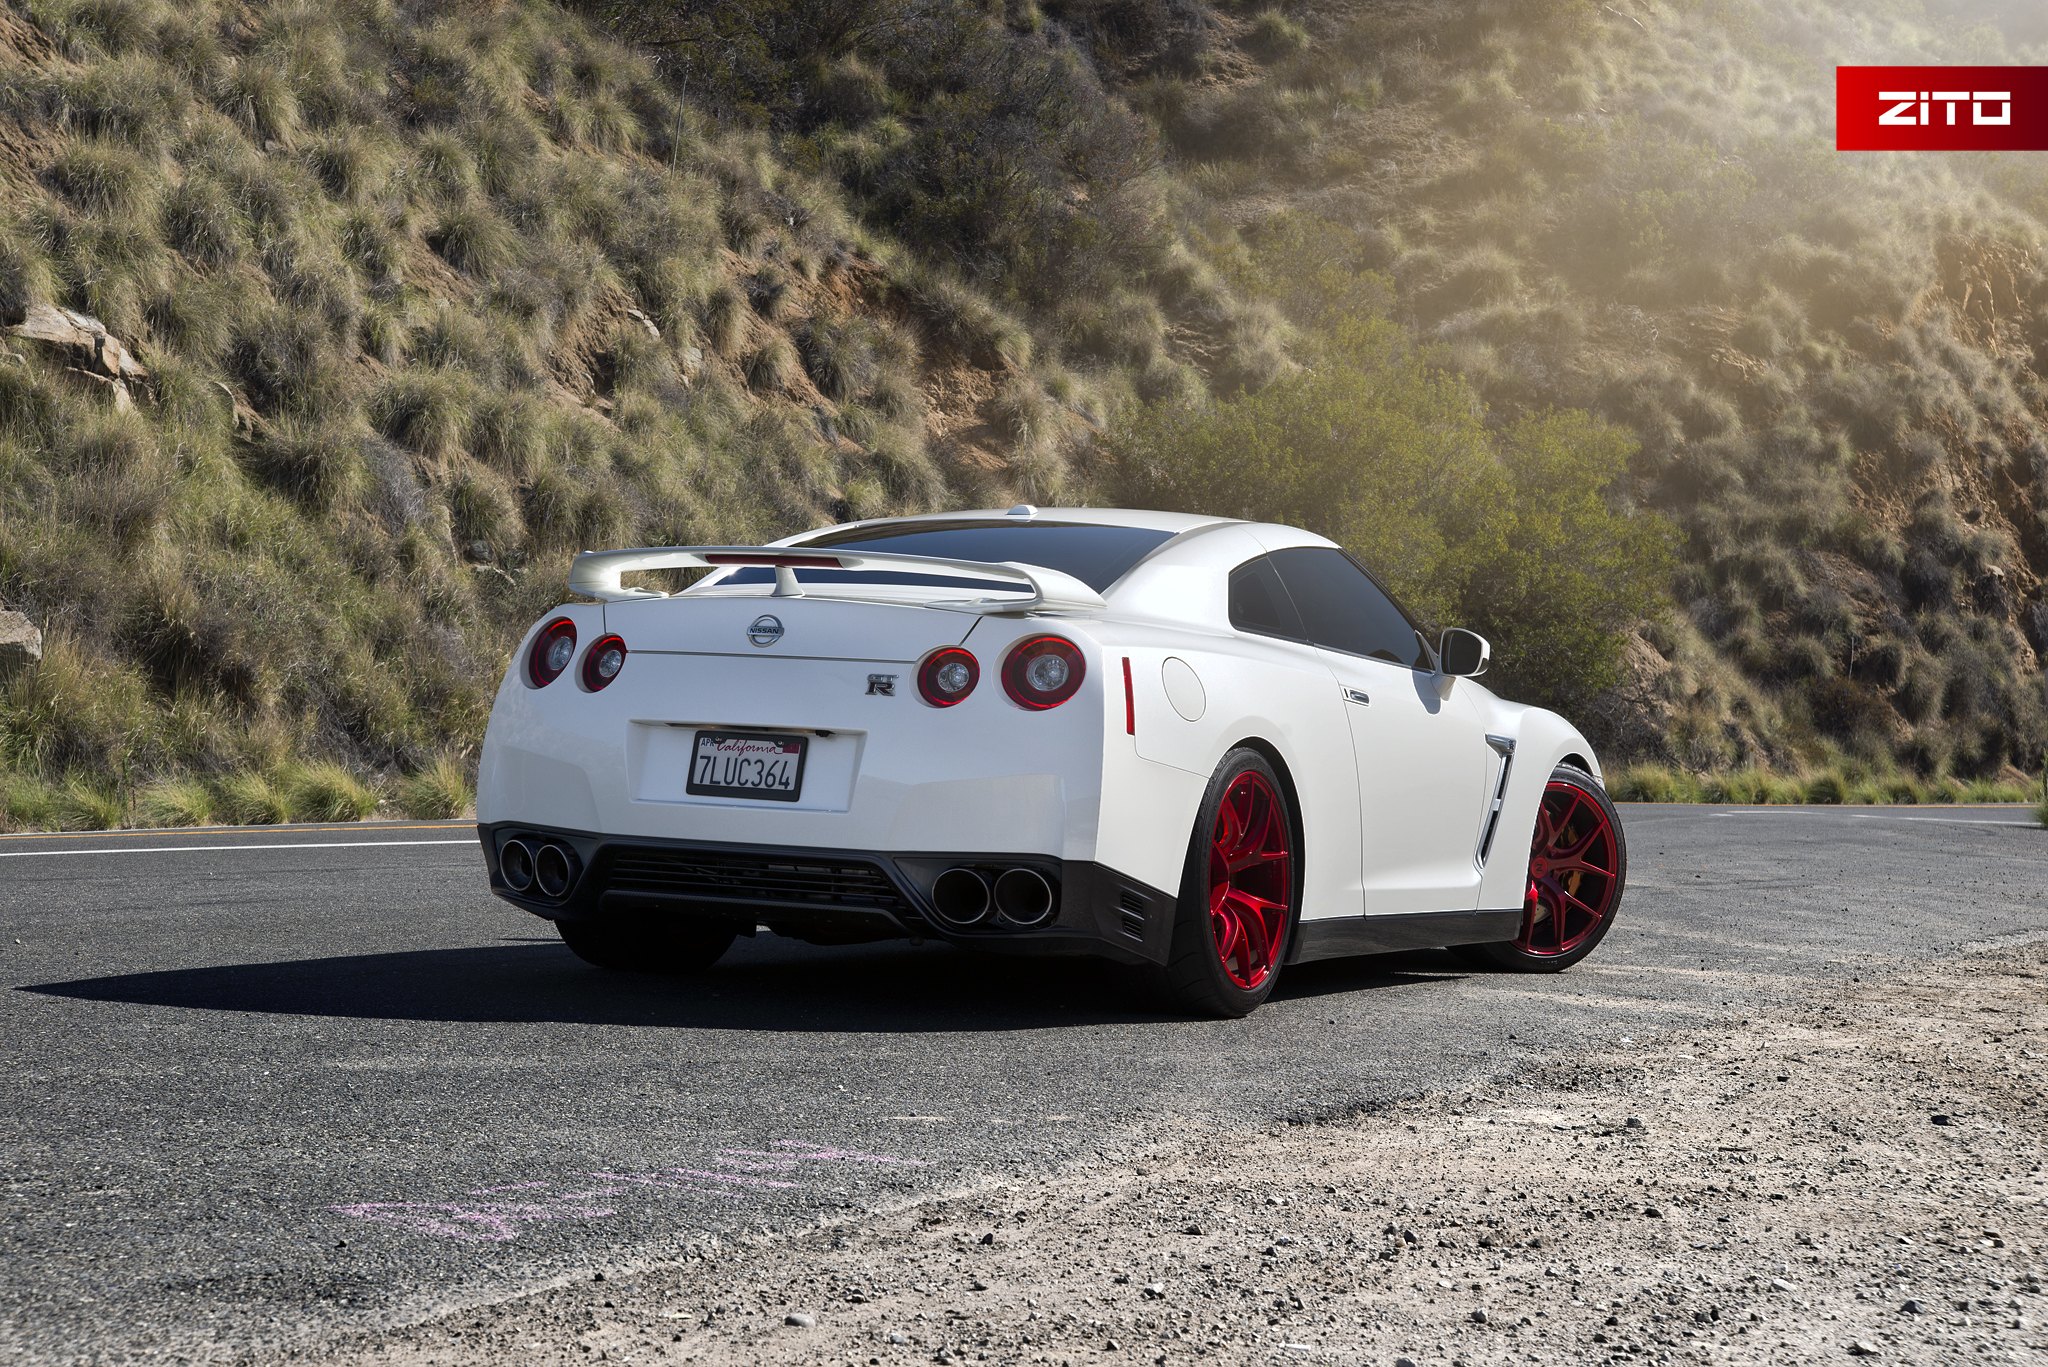 White Nissan GT-R with Custom Rear Diffuser - Photo by Zito Wheels